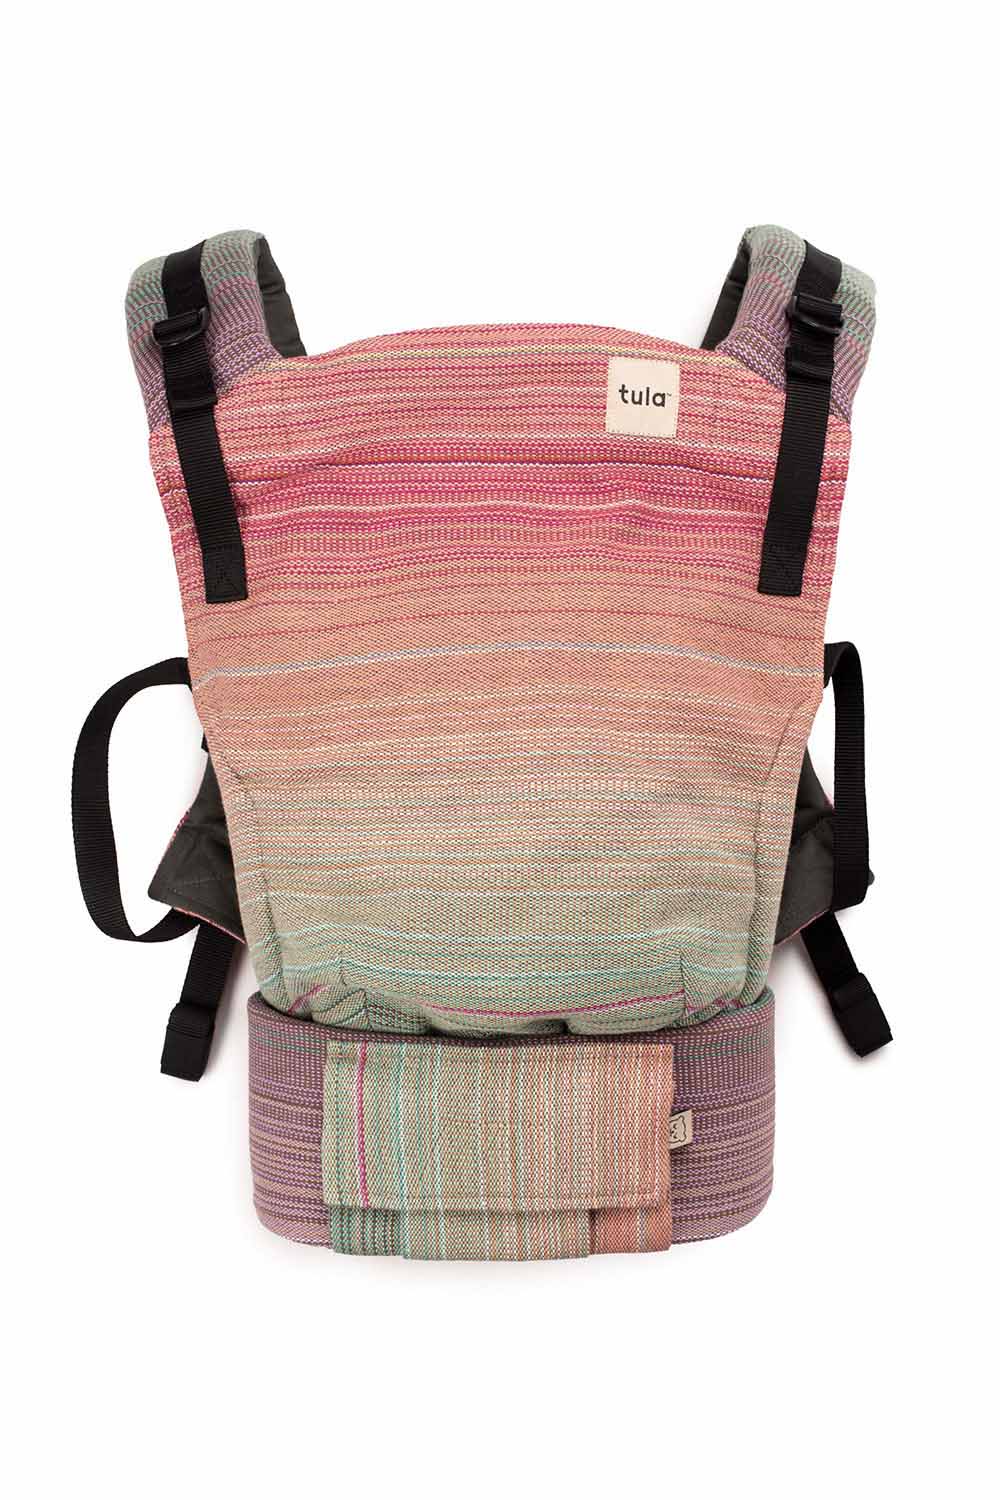 Starry Eyes - Signature Handwoven Free-to-Grow Baby Carrier